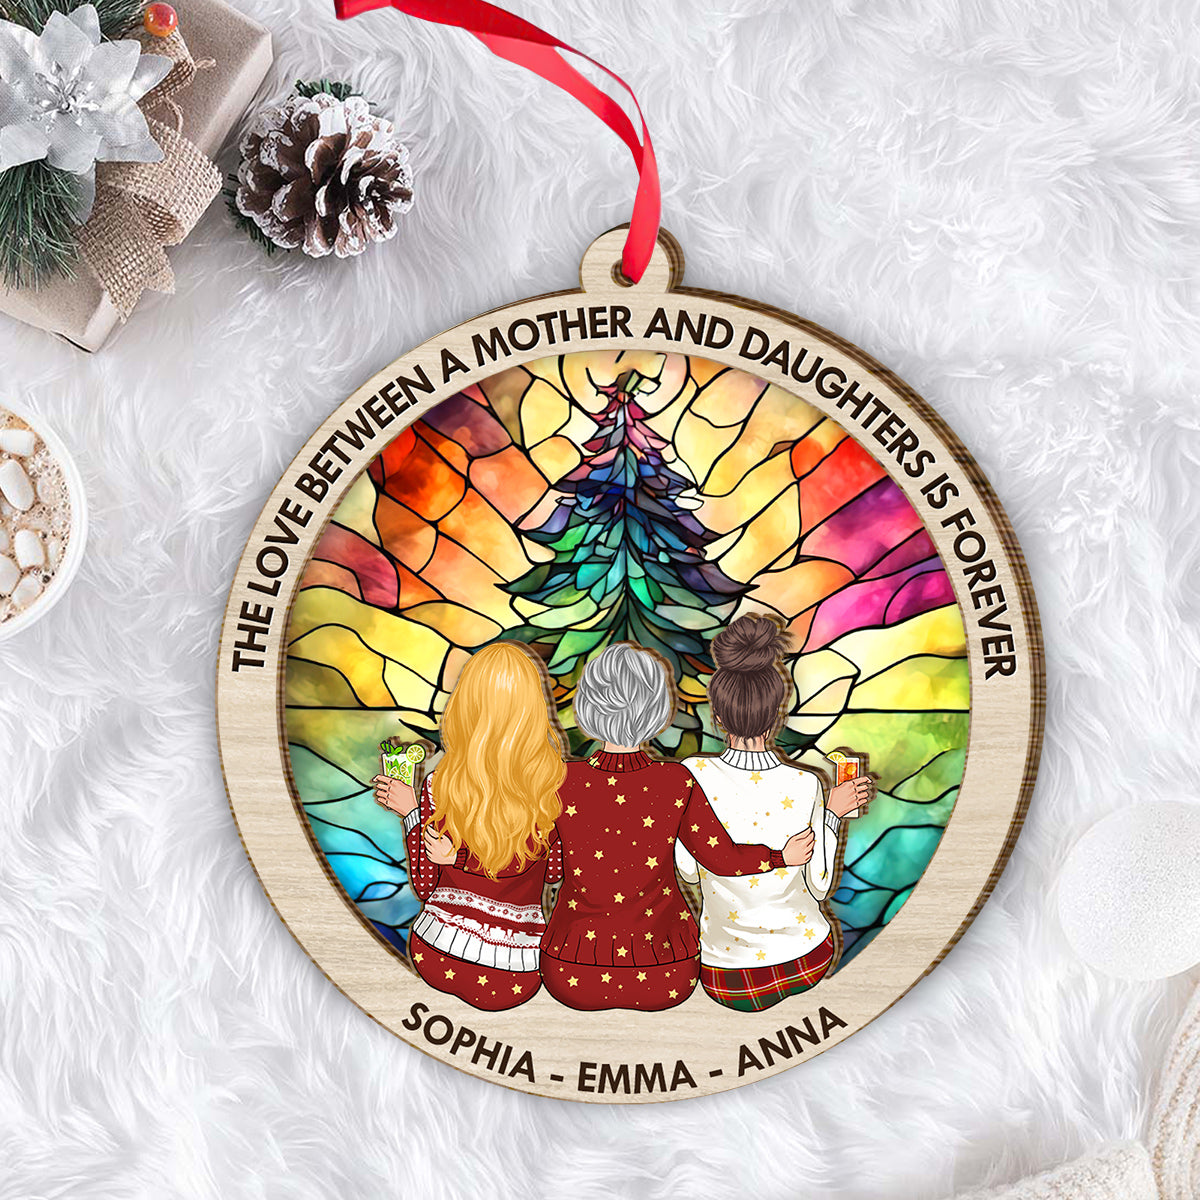 Mother Daughters ornament - The love between a Mother and Daughters is  forever